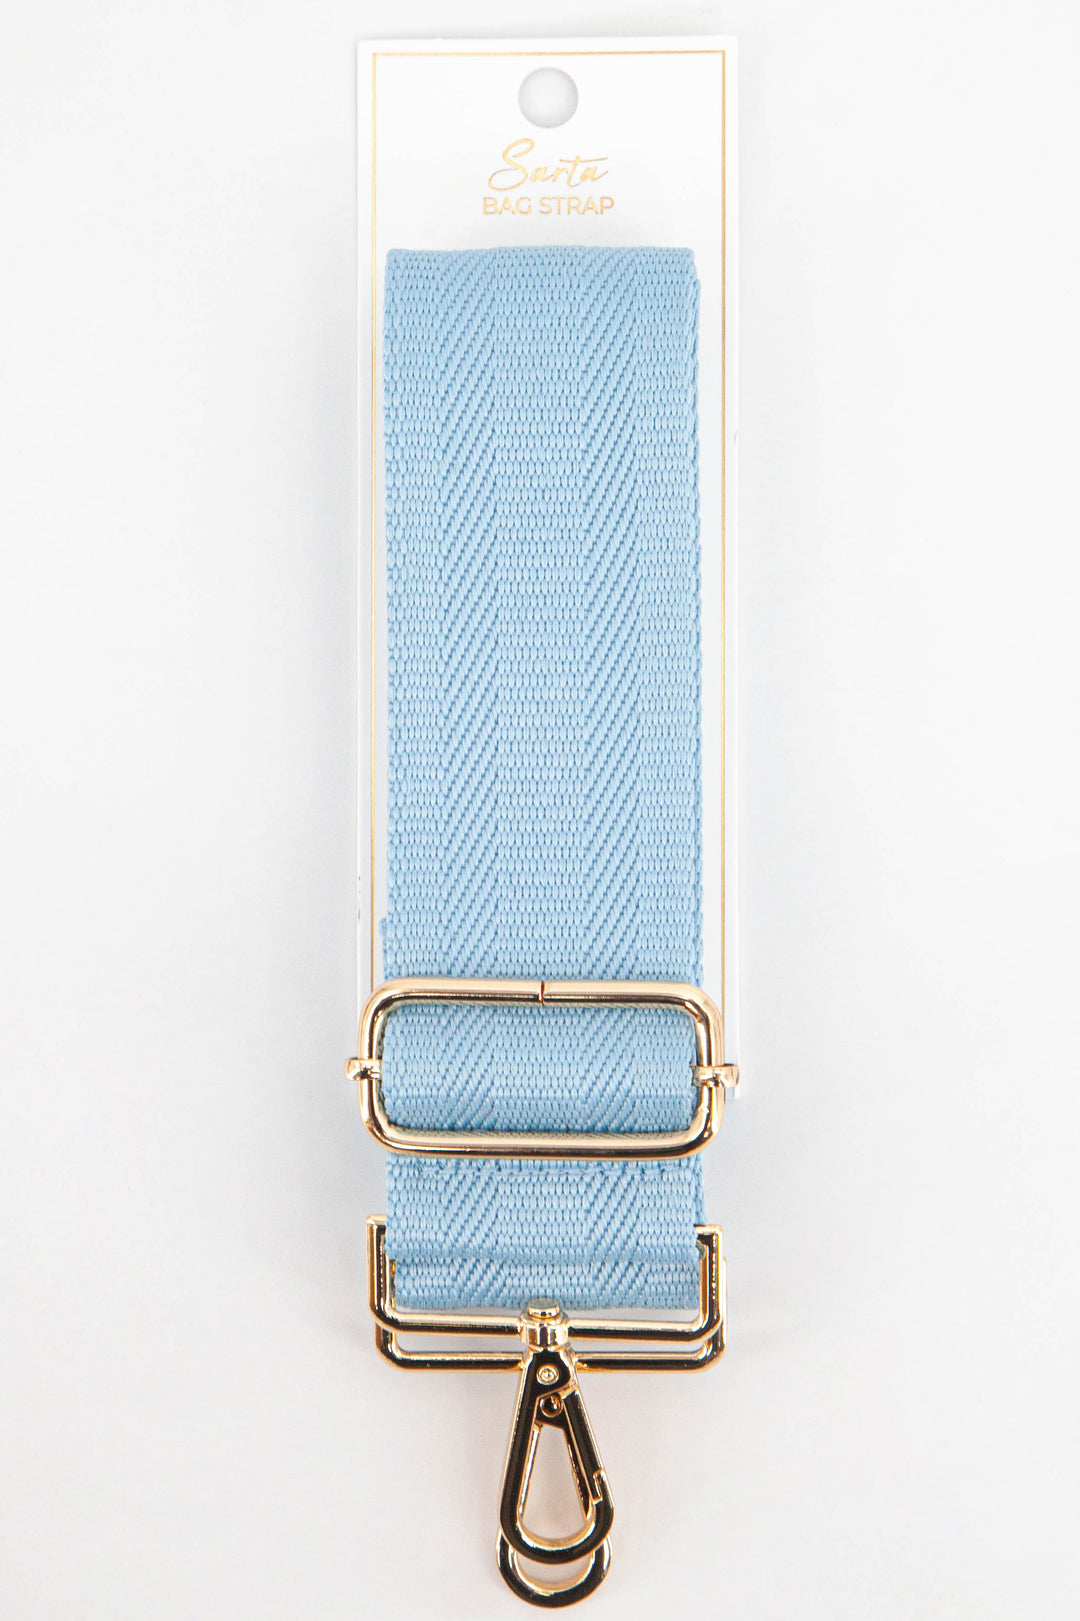 plain light blue woven bag strap with gold clip on hardware